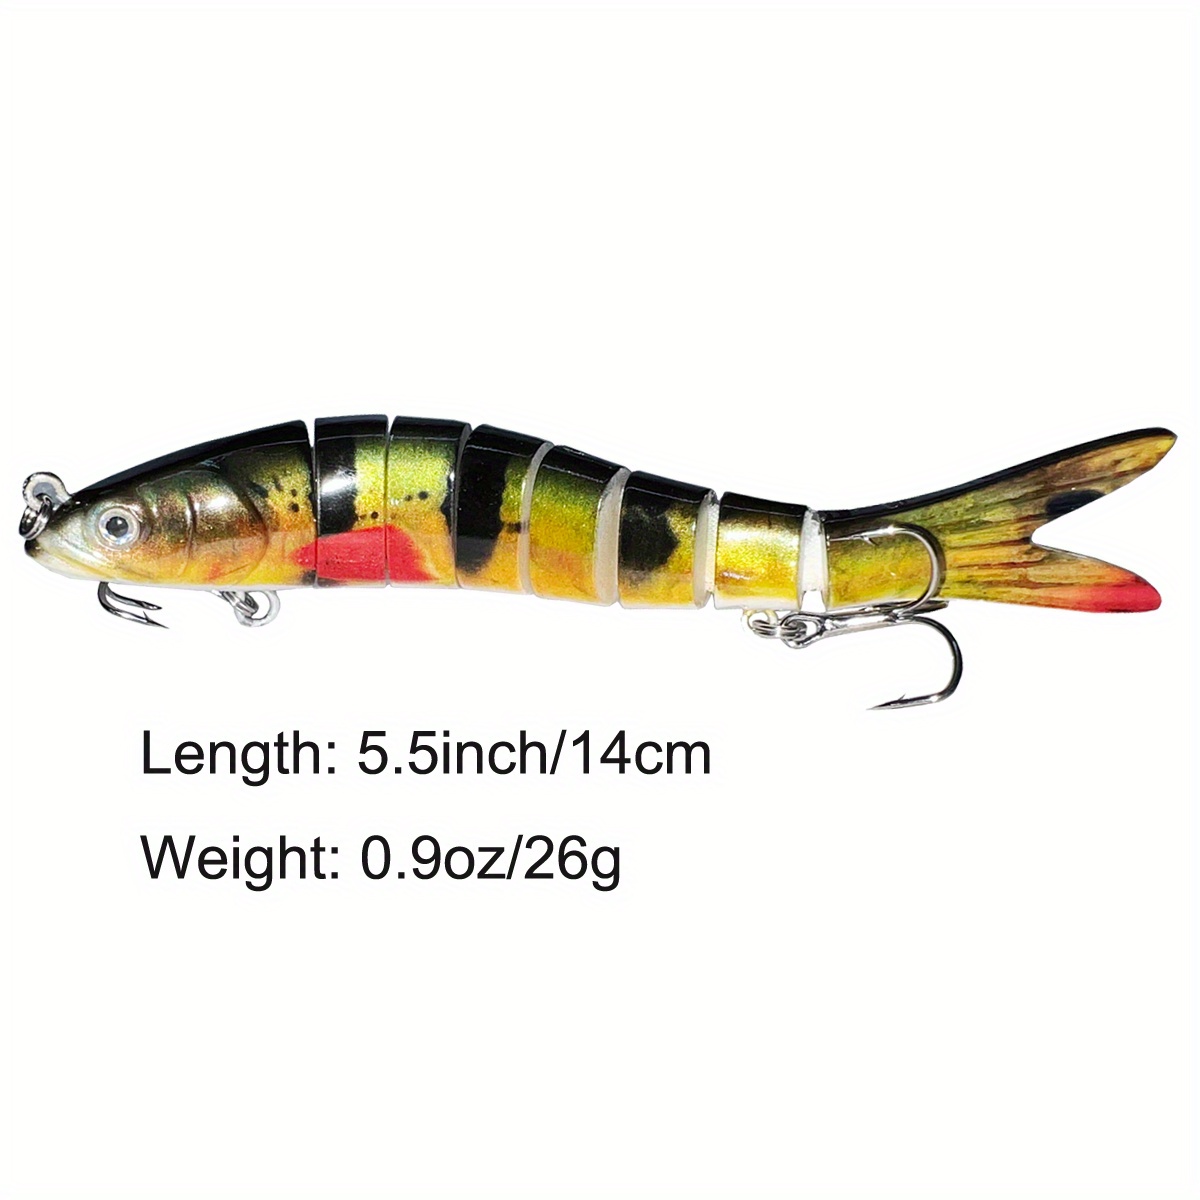 Realistic Fishing Lures Soft Bionic Fishing Lures Striper Fishing Lures Fishing  Lures Bass Swimbaits For Saltwater Freshwater - AliExpress